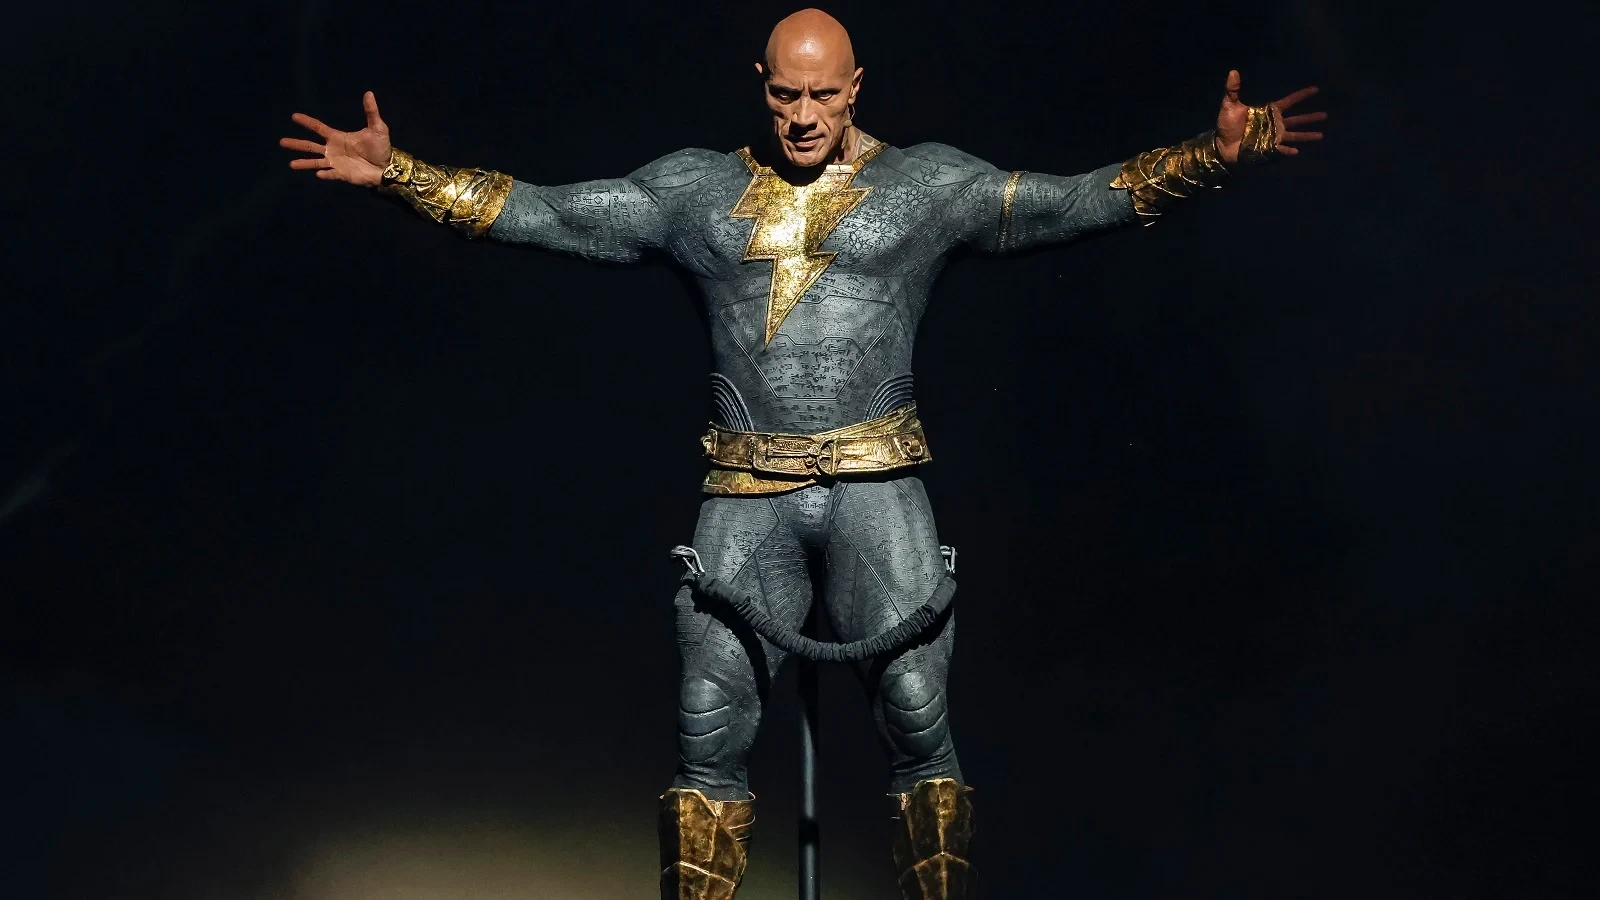 Dwayne Johnson donned the suit of Black Adam at the SDCC 2022.